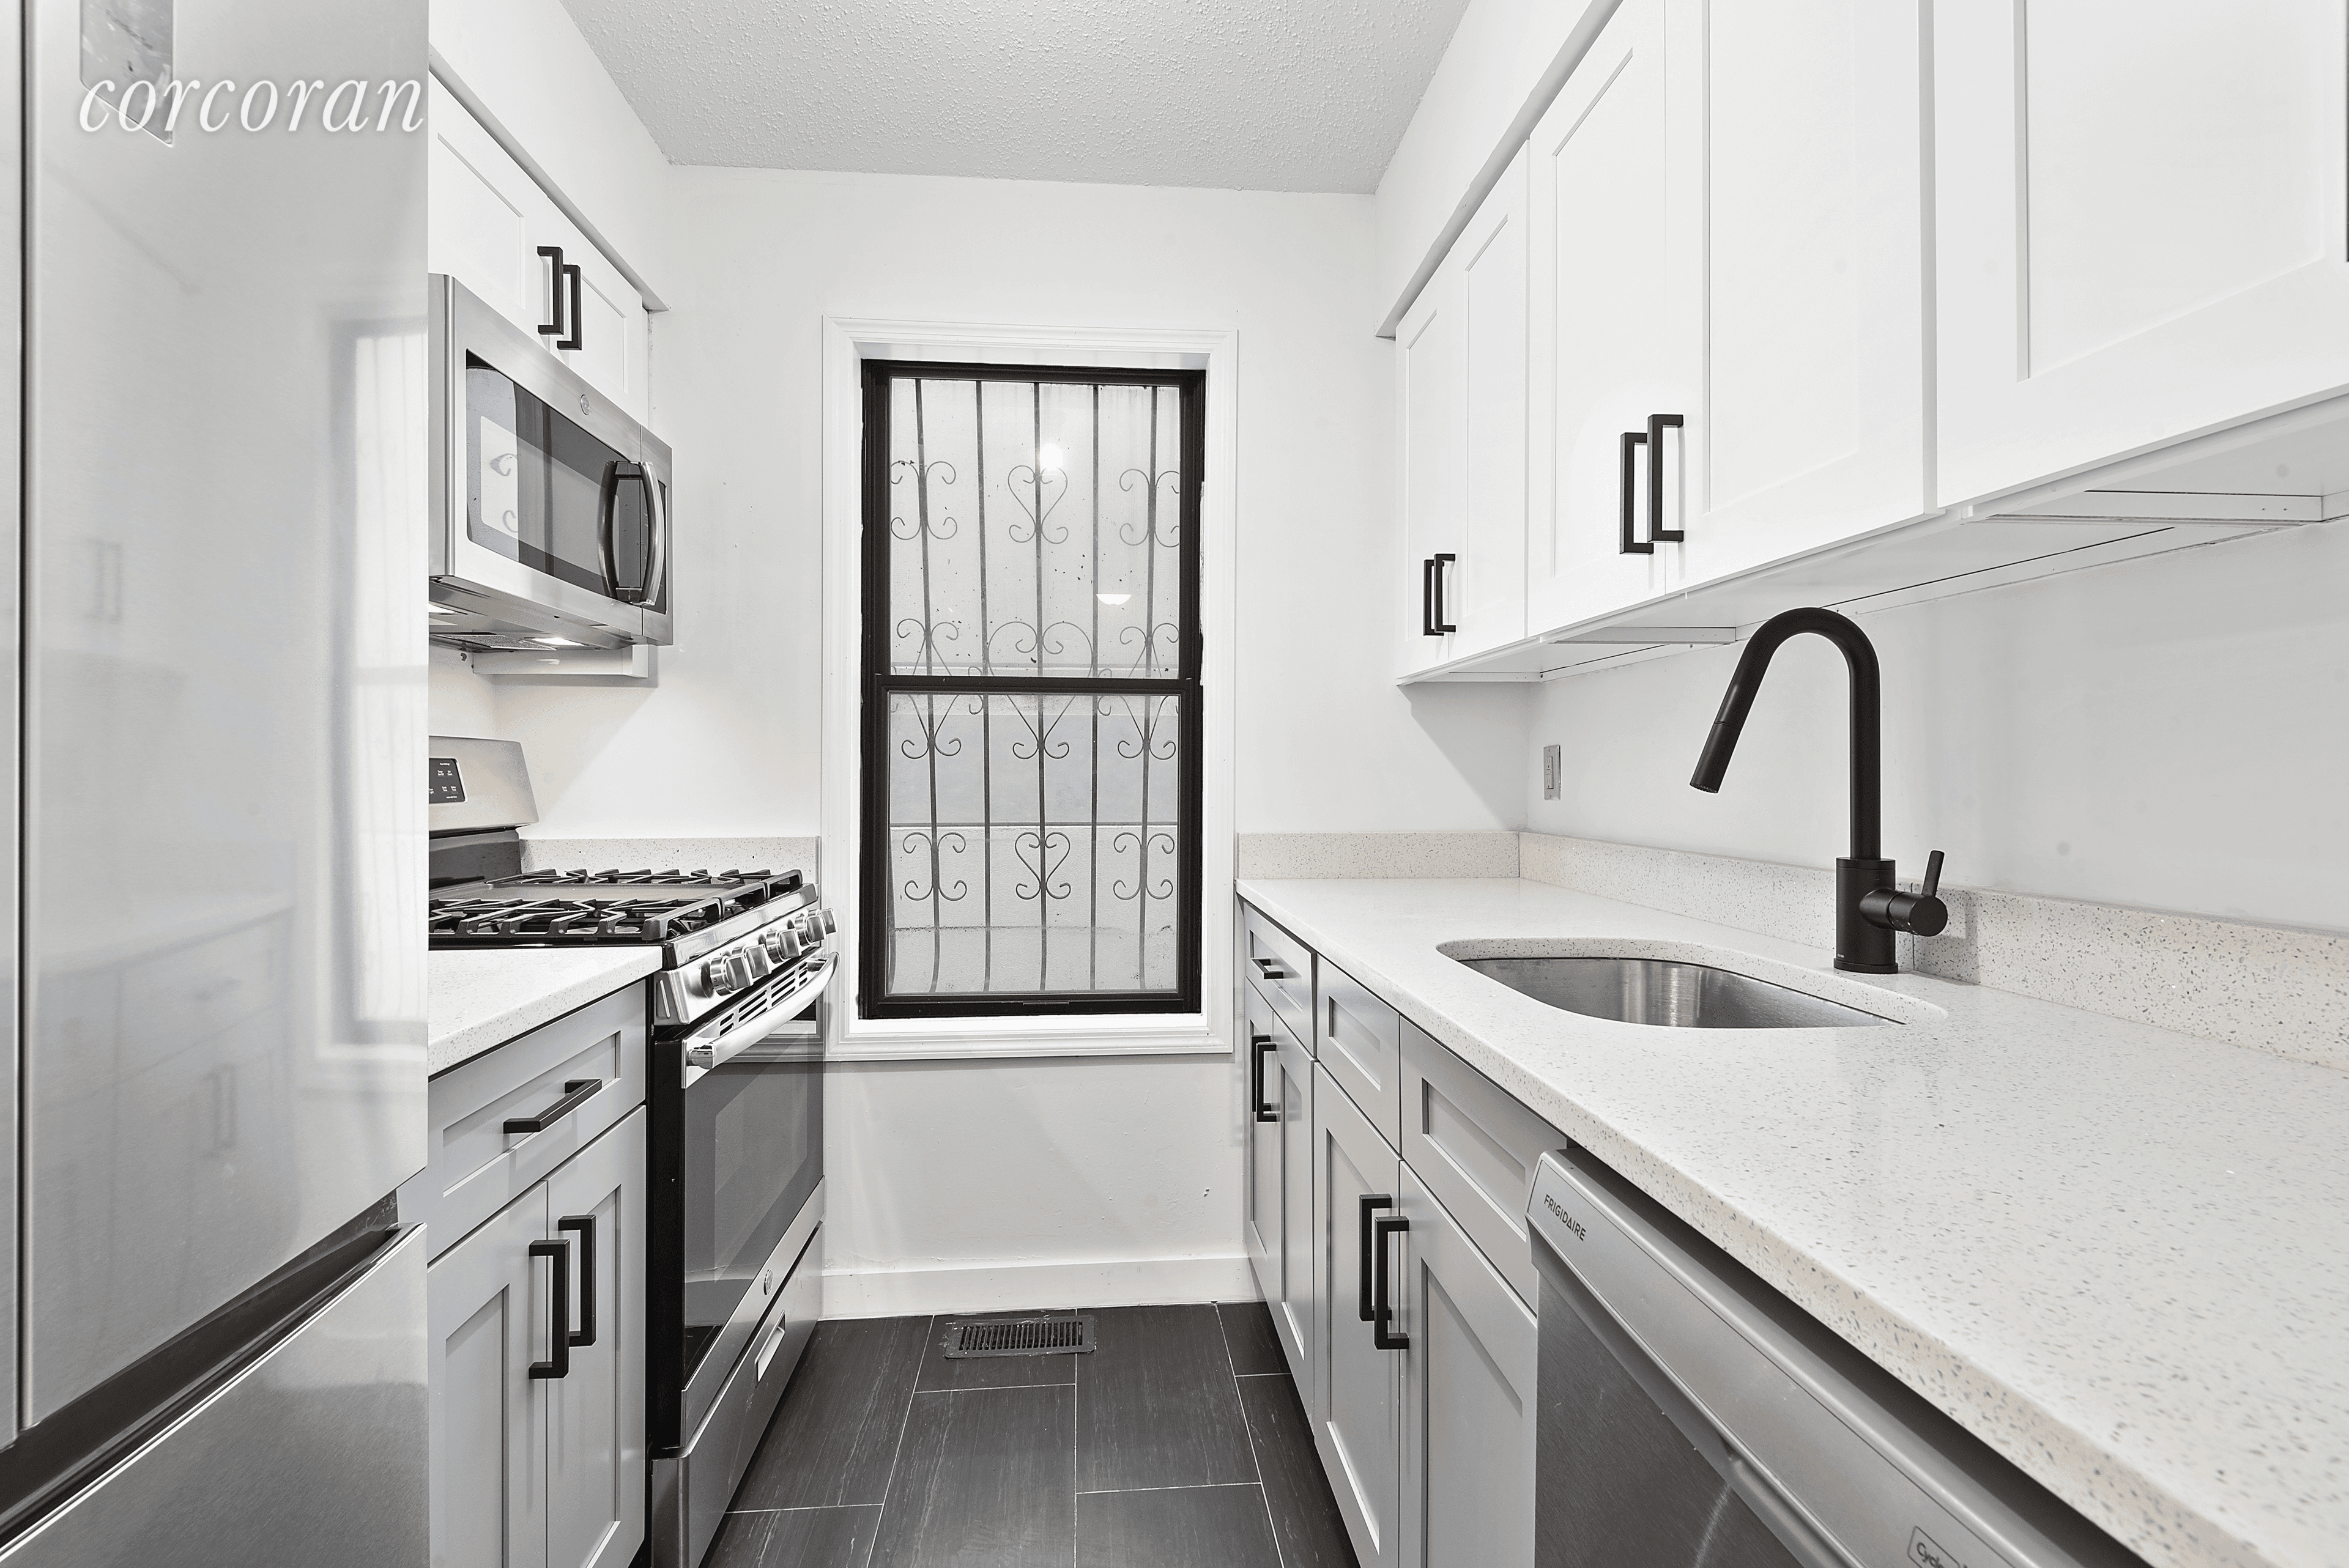 Welcome to 185 Tompkins Street, Apartment 1, a newly renovated, enormous two bedroom duplex with private parking in the heart of Bed Stuy.